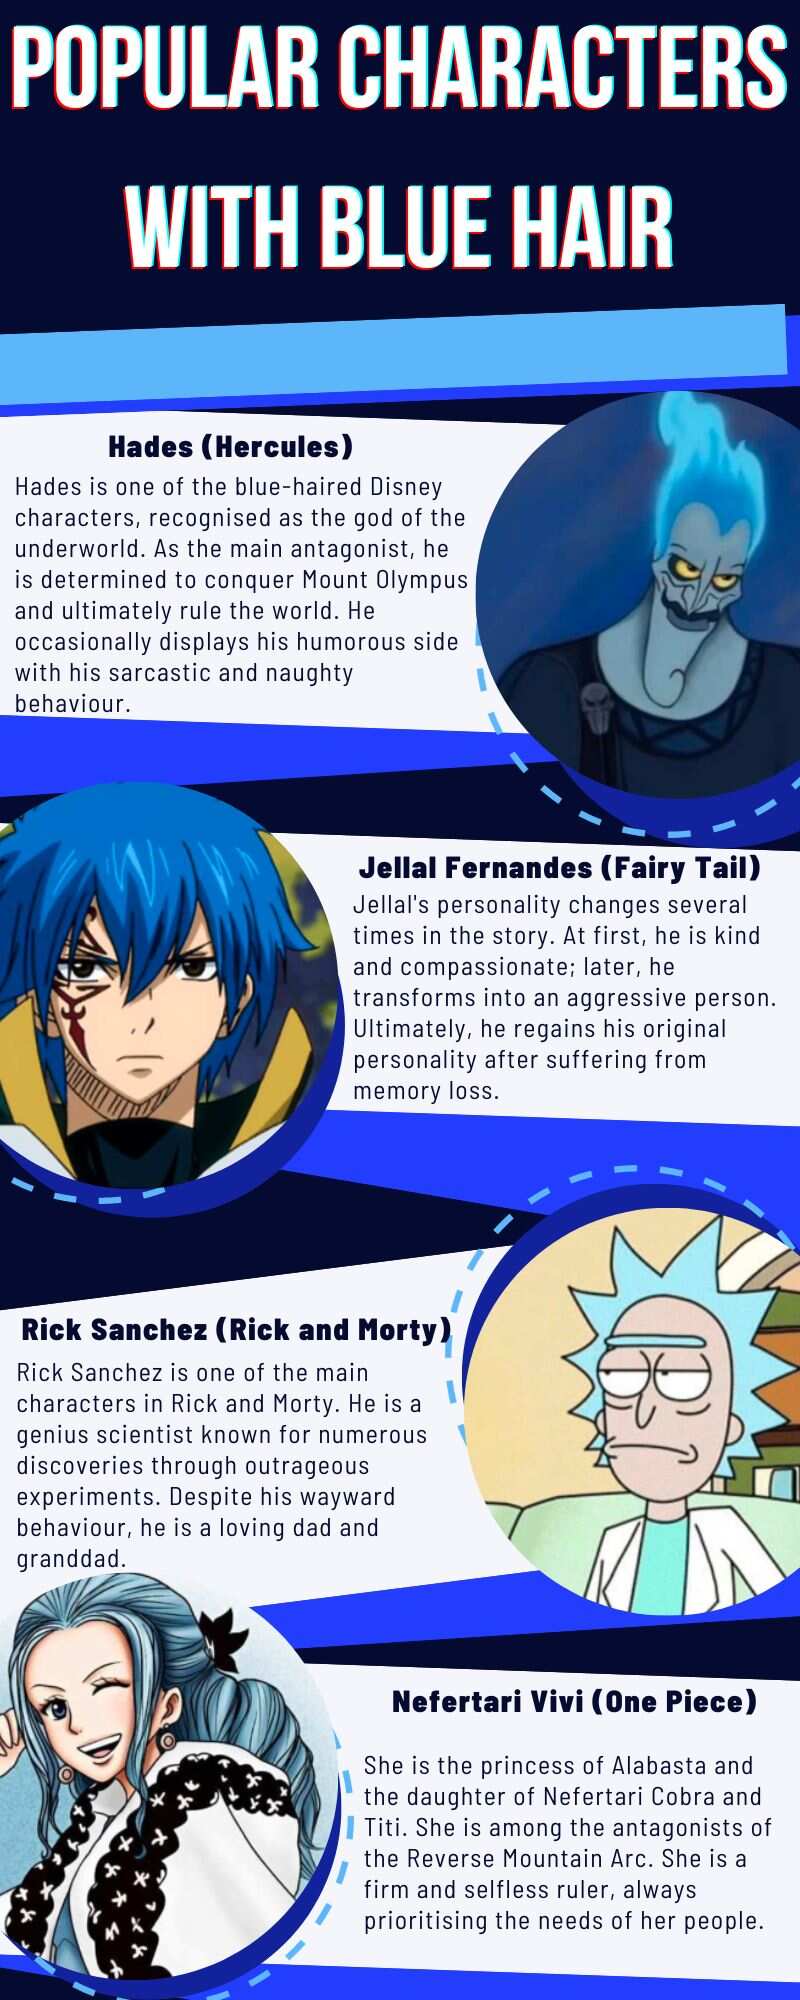 Popular characters with blue hair